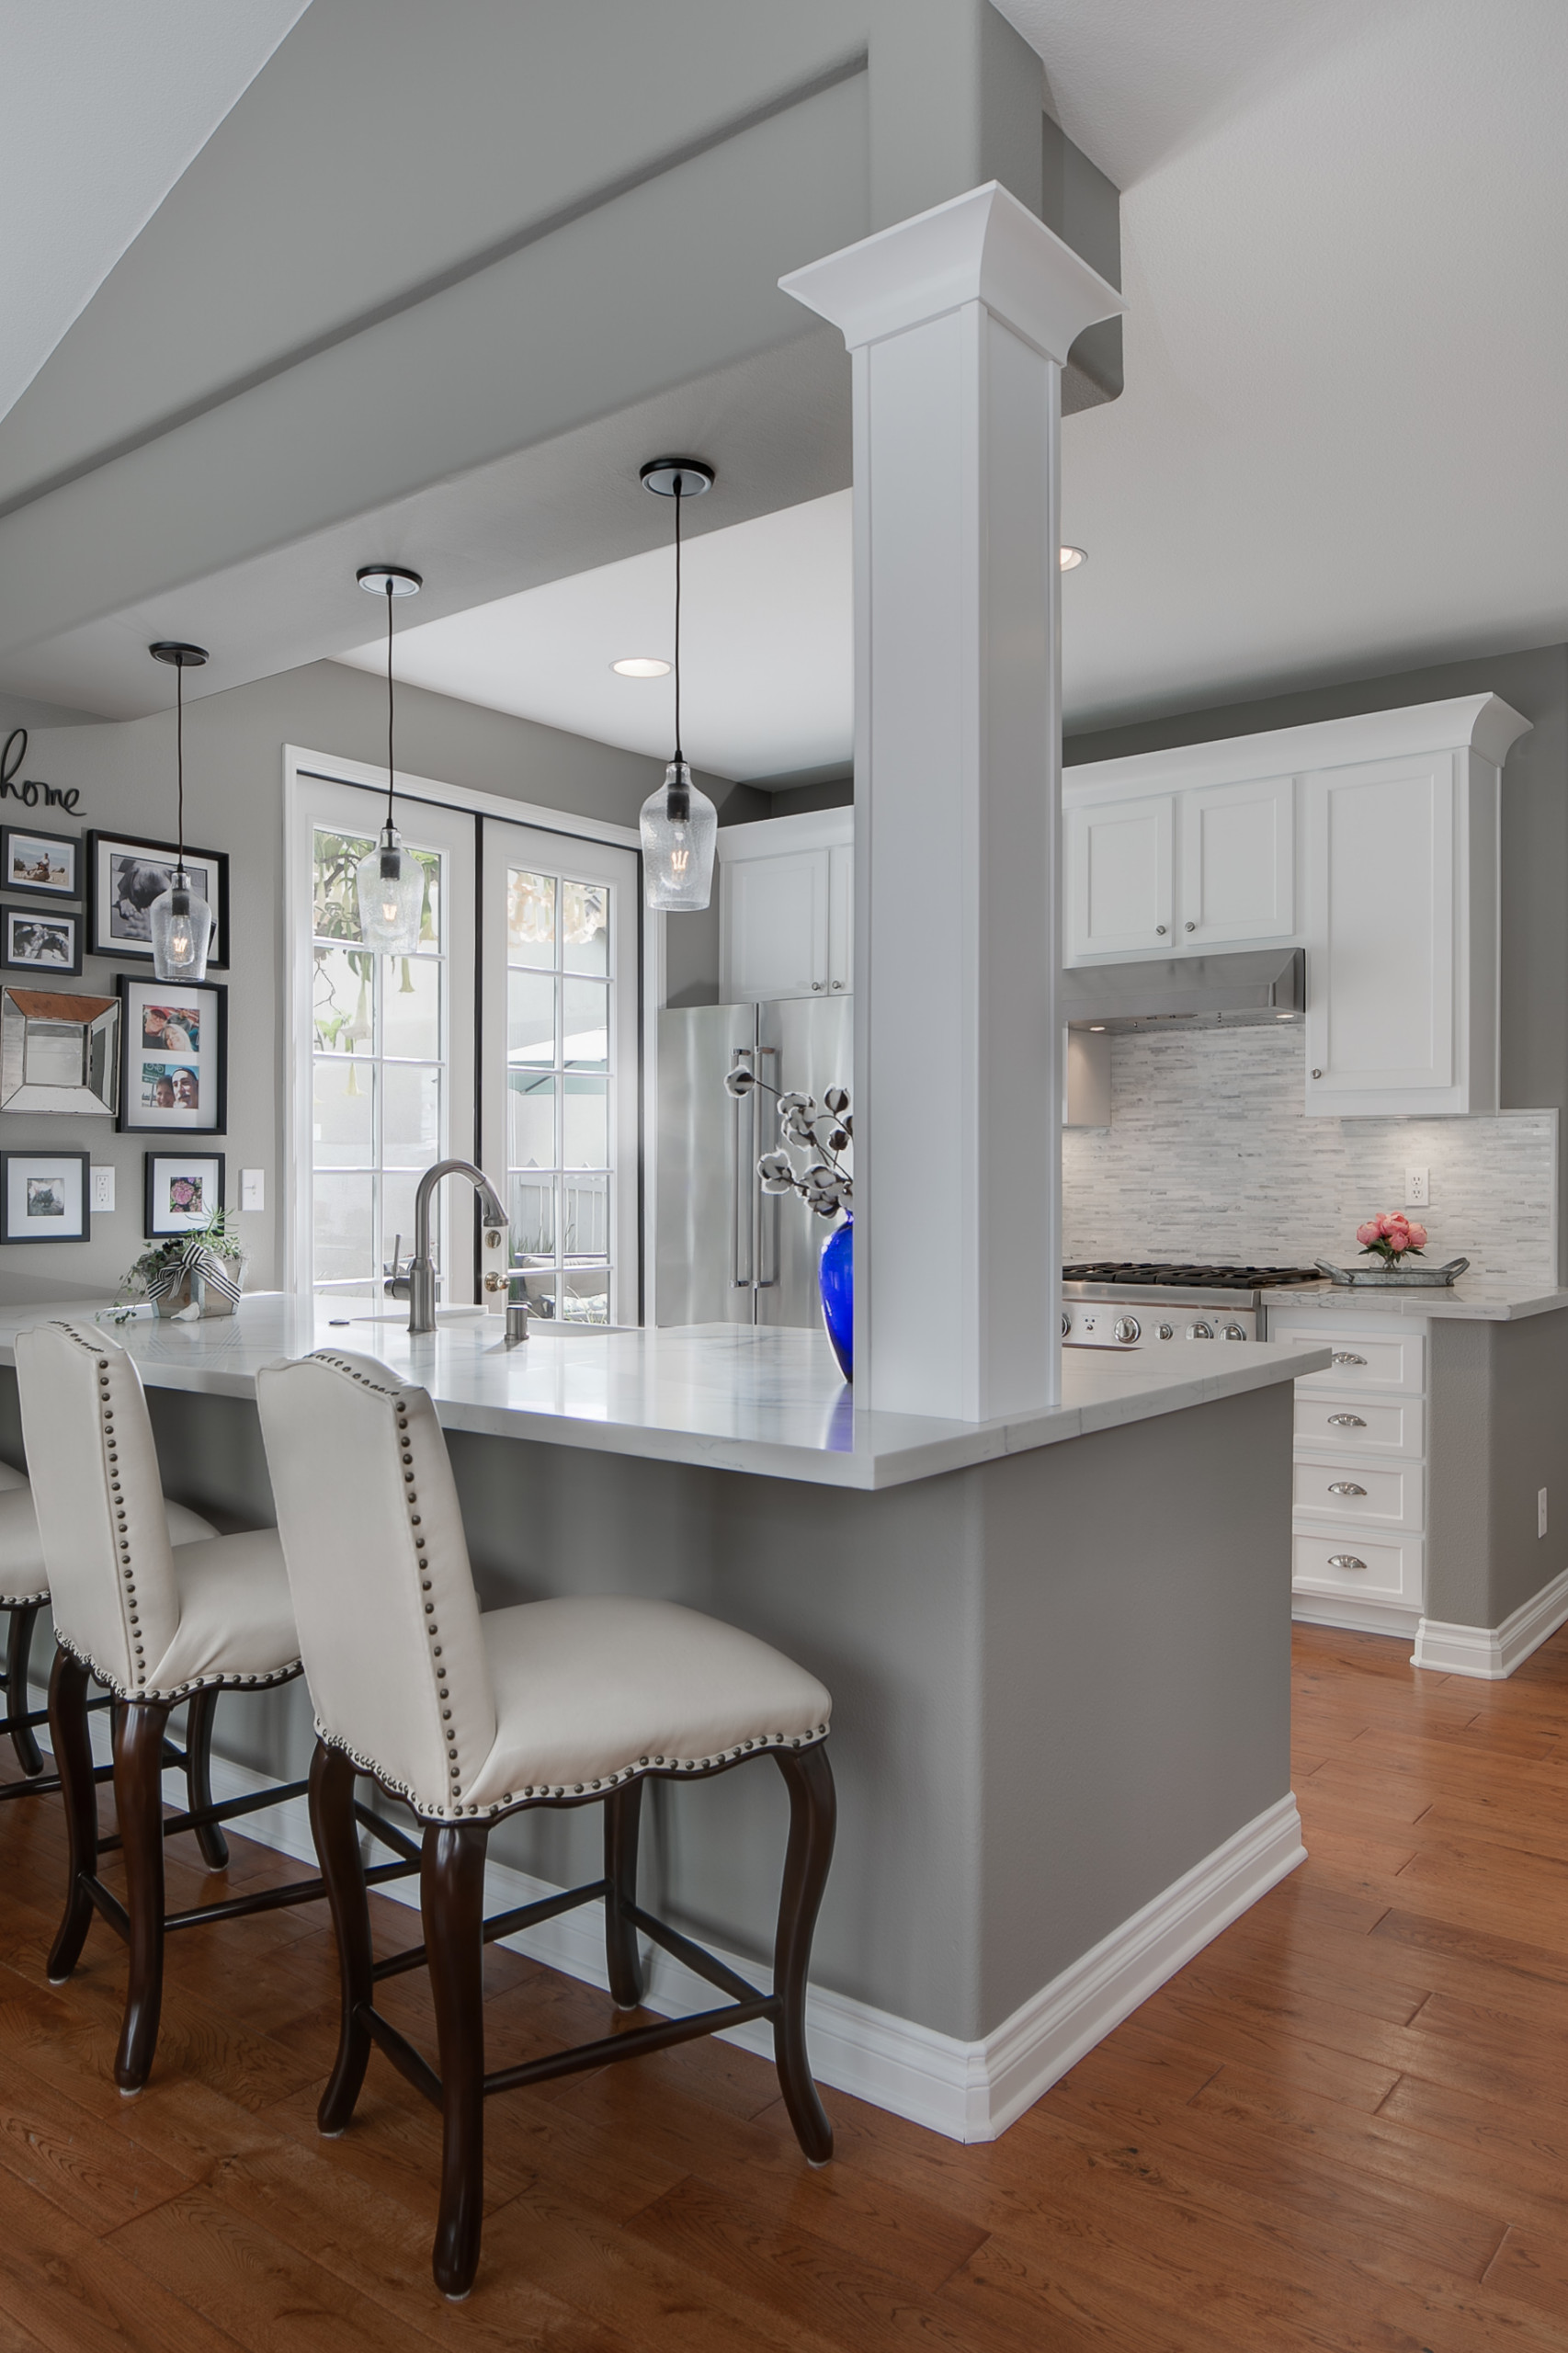 18 Small Kitchen Ideas You'll Love   August, 18   Houzz